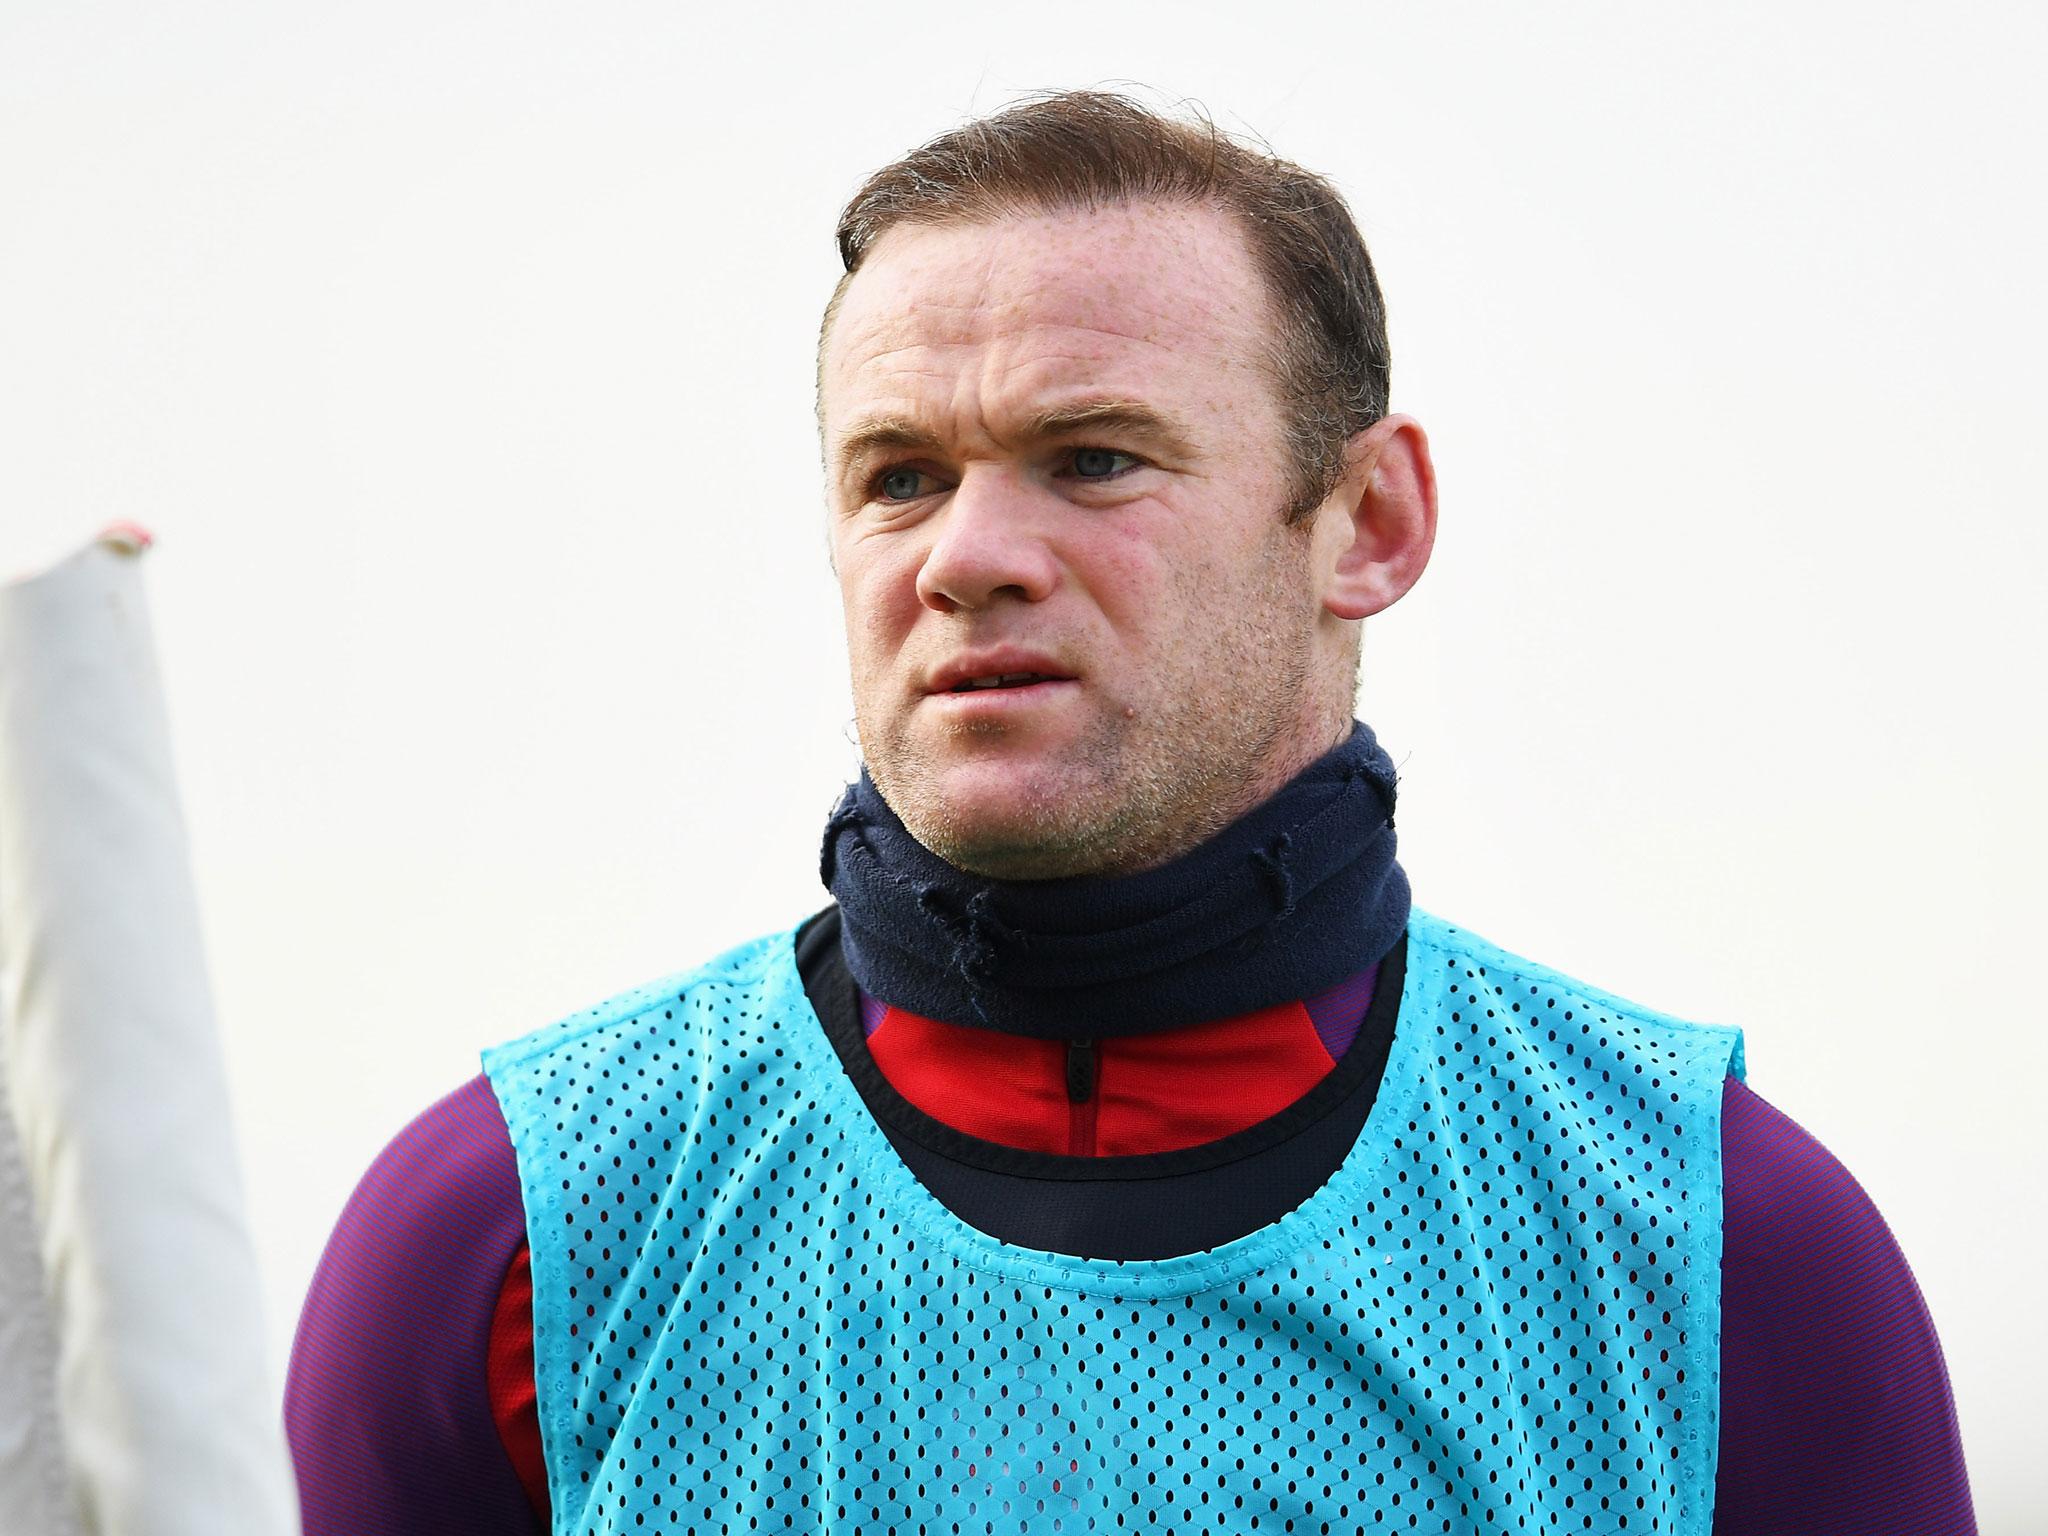 Wayne Rooney suffered a knee injury last Friday after slipping on a bottle in the England dressing room